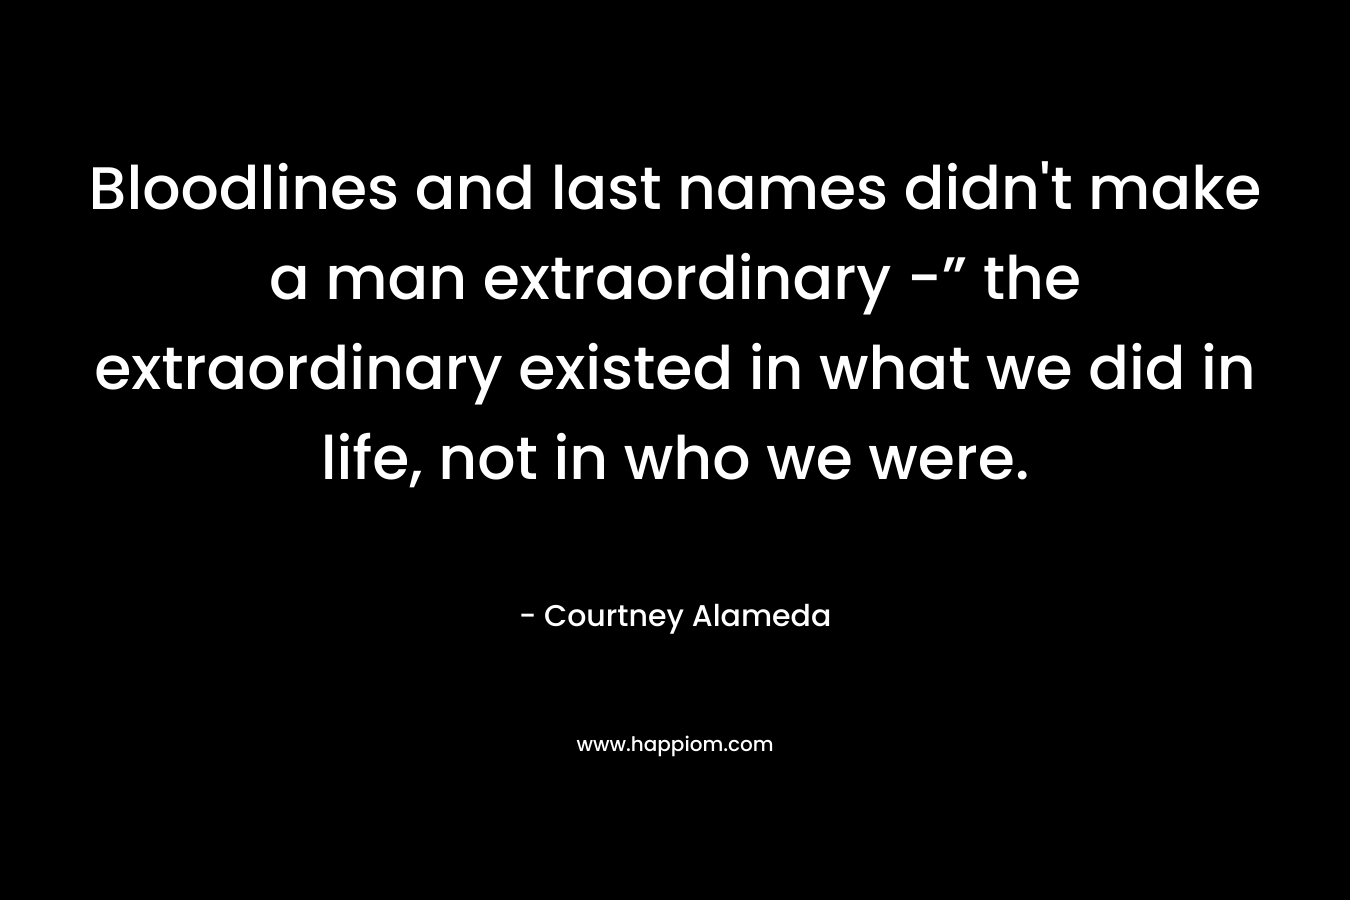 Bloodlines and last names didn’t make a man extraordinary -” the extraordinary existed in what we did in life, not in who we were. – Courtney Alameda